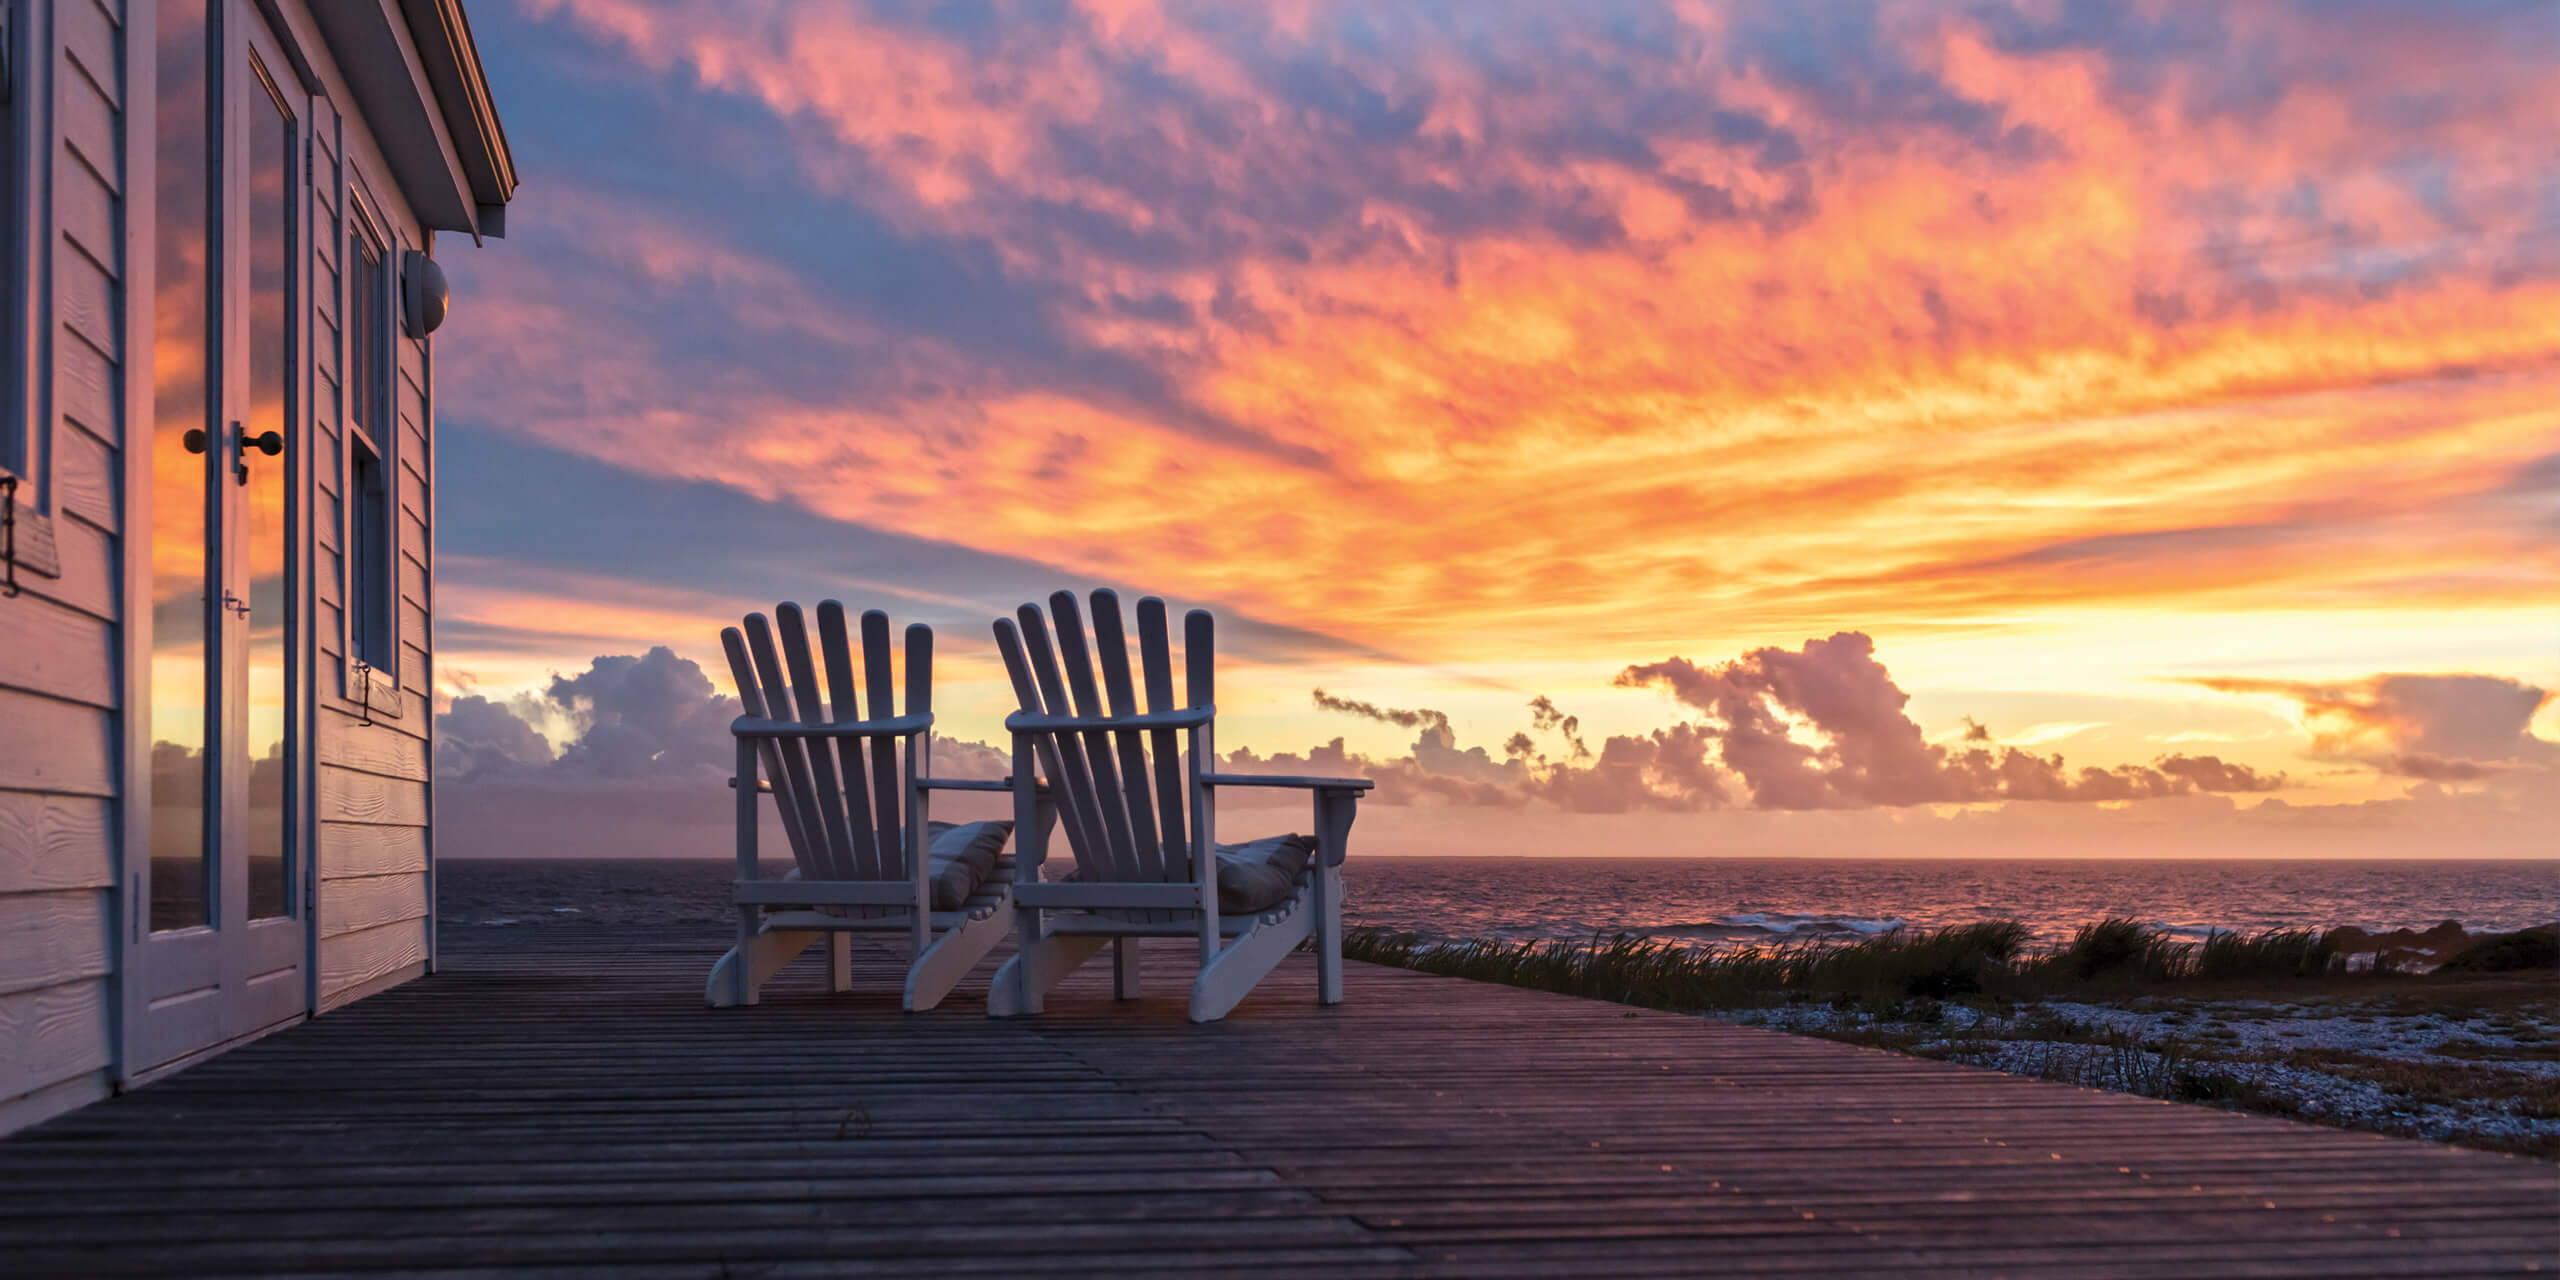 Two Empty Chairs Facing Magnificent Sunset View at Beach